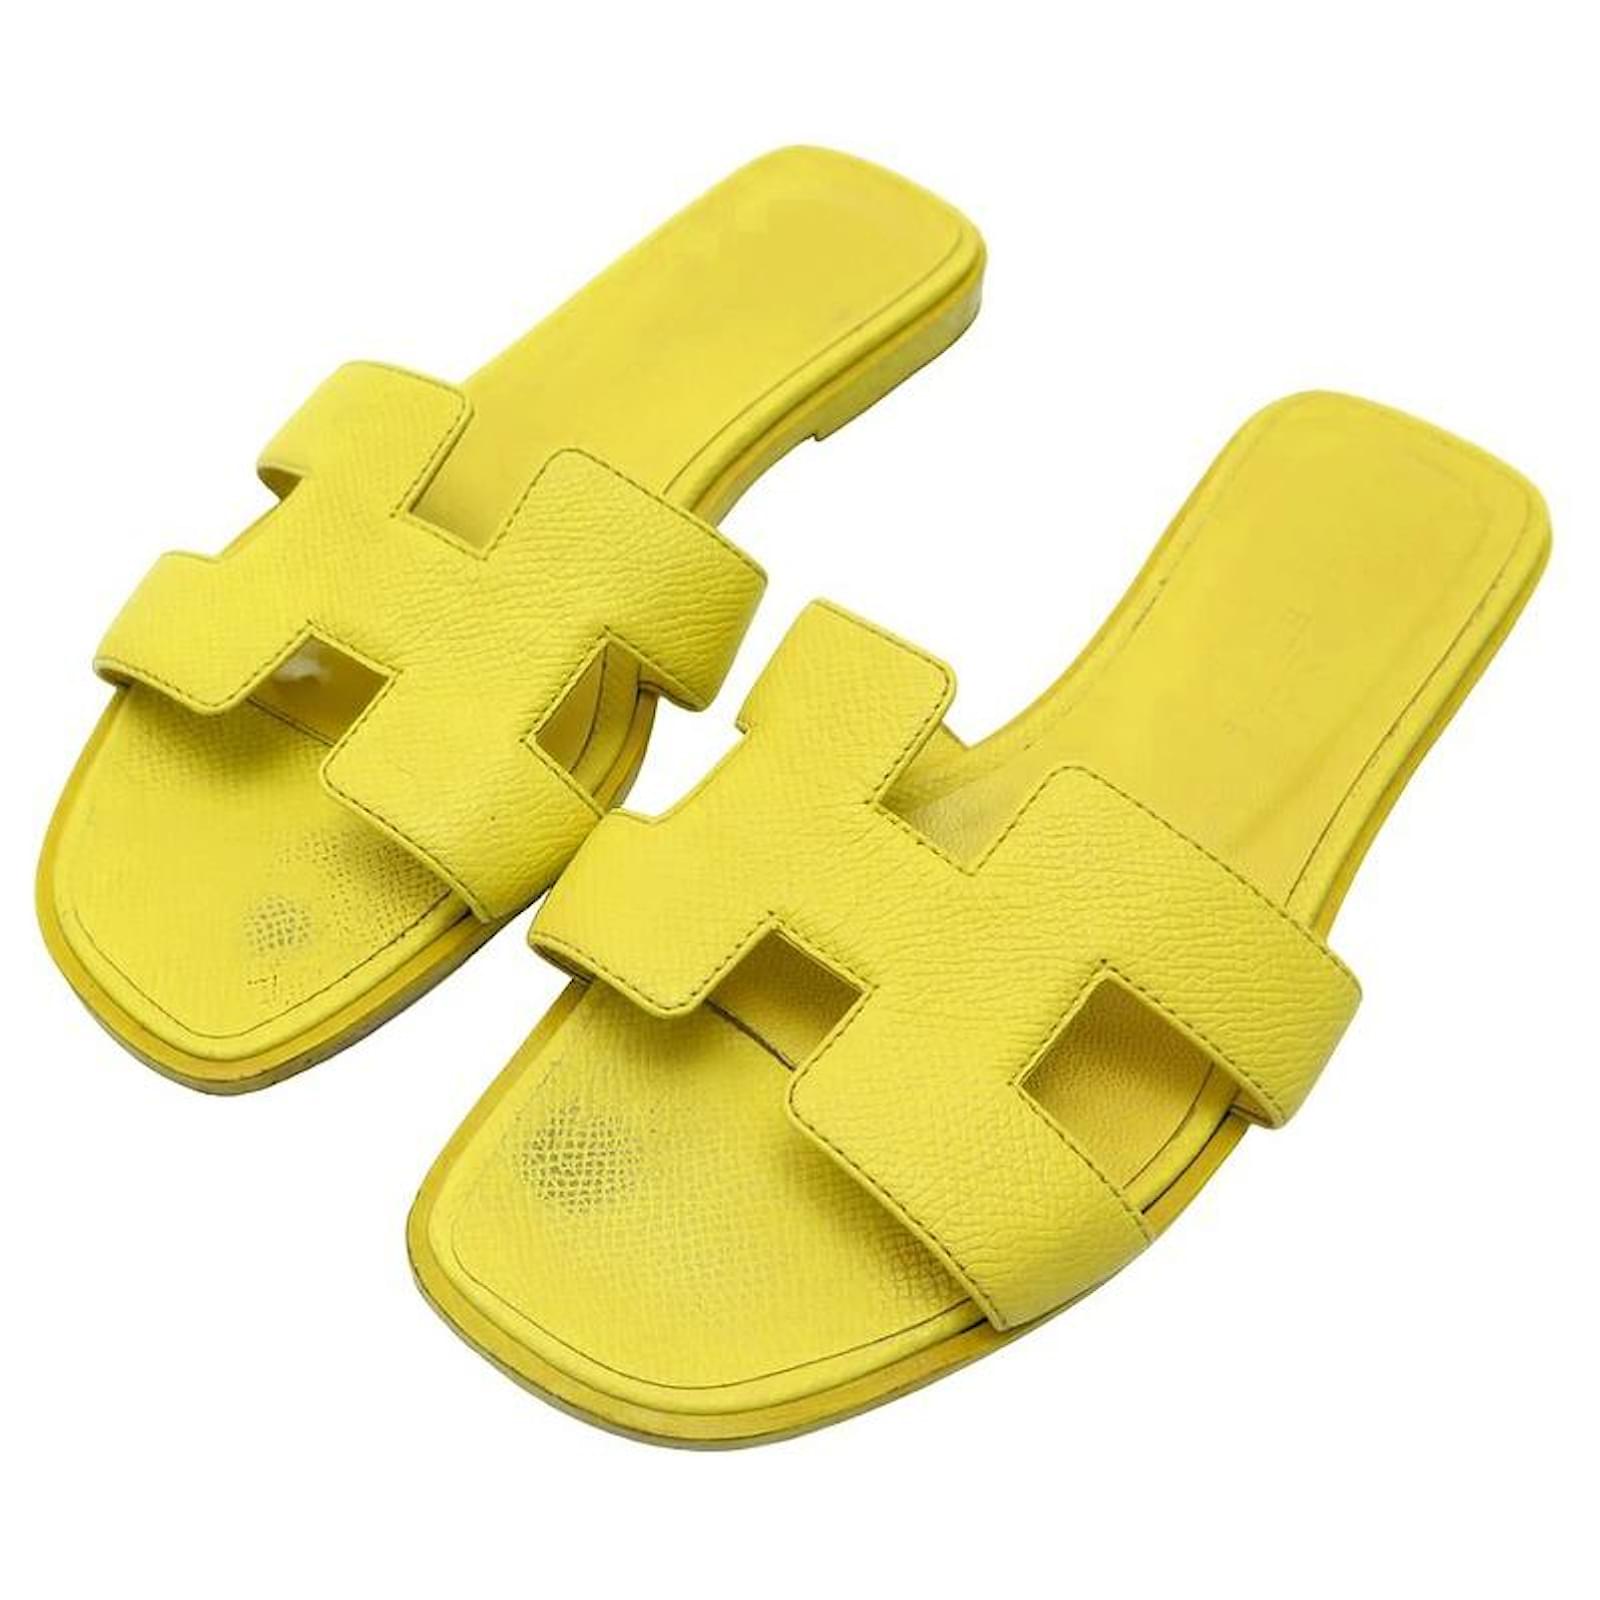 Hermès HERMES SHOES ORAN SANDALS 35 YELLOW EPSOM LEATHER LEATHER